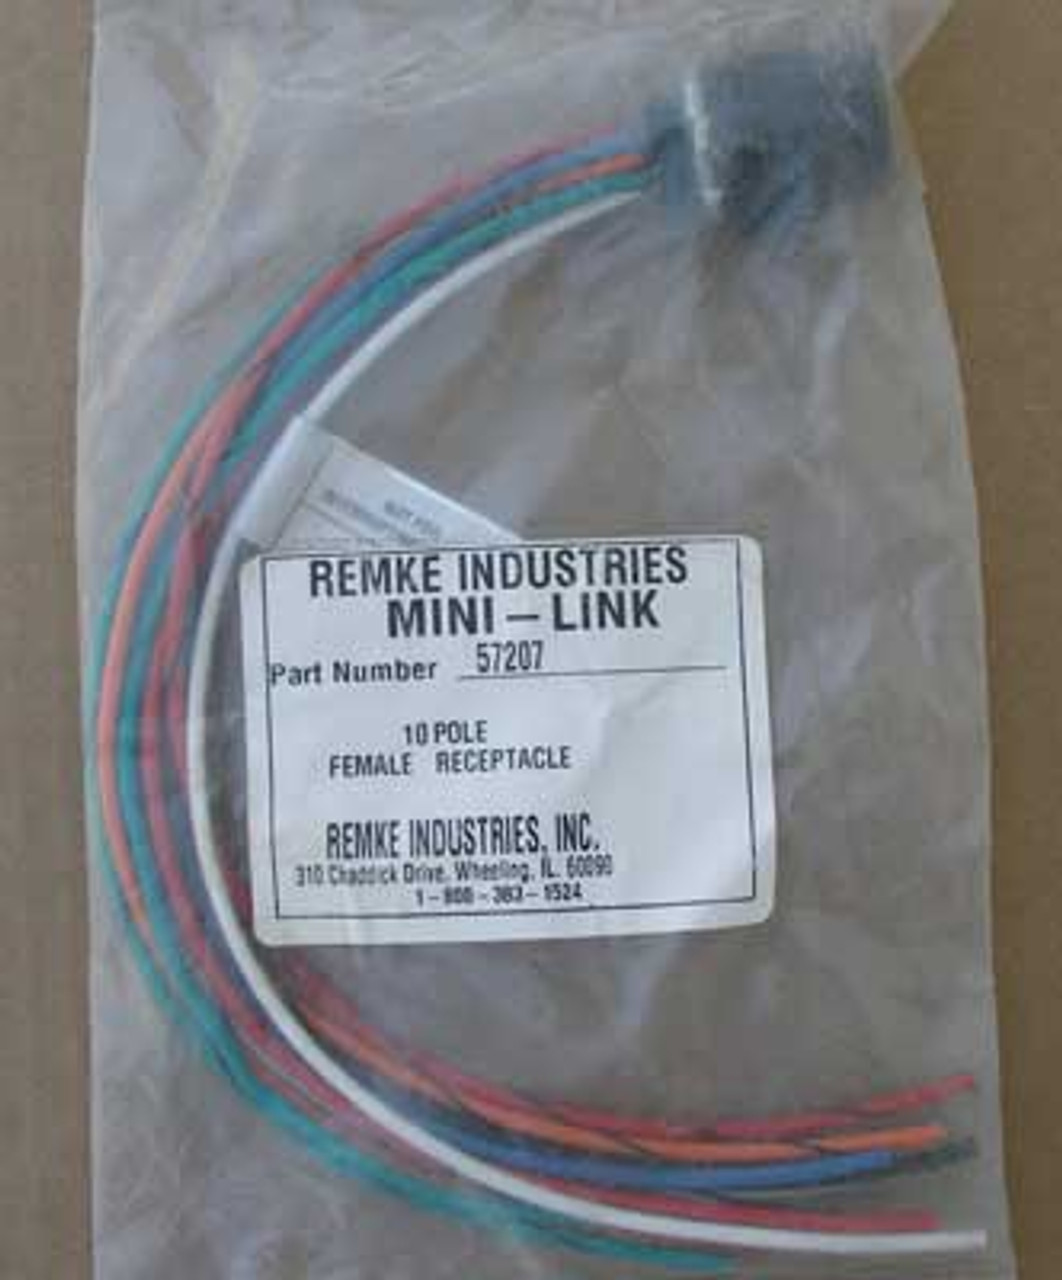 Remke 57207 Rubber Mini-Link Receptacle 10 Pole with 12" Pigtail Lead